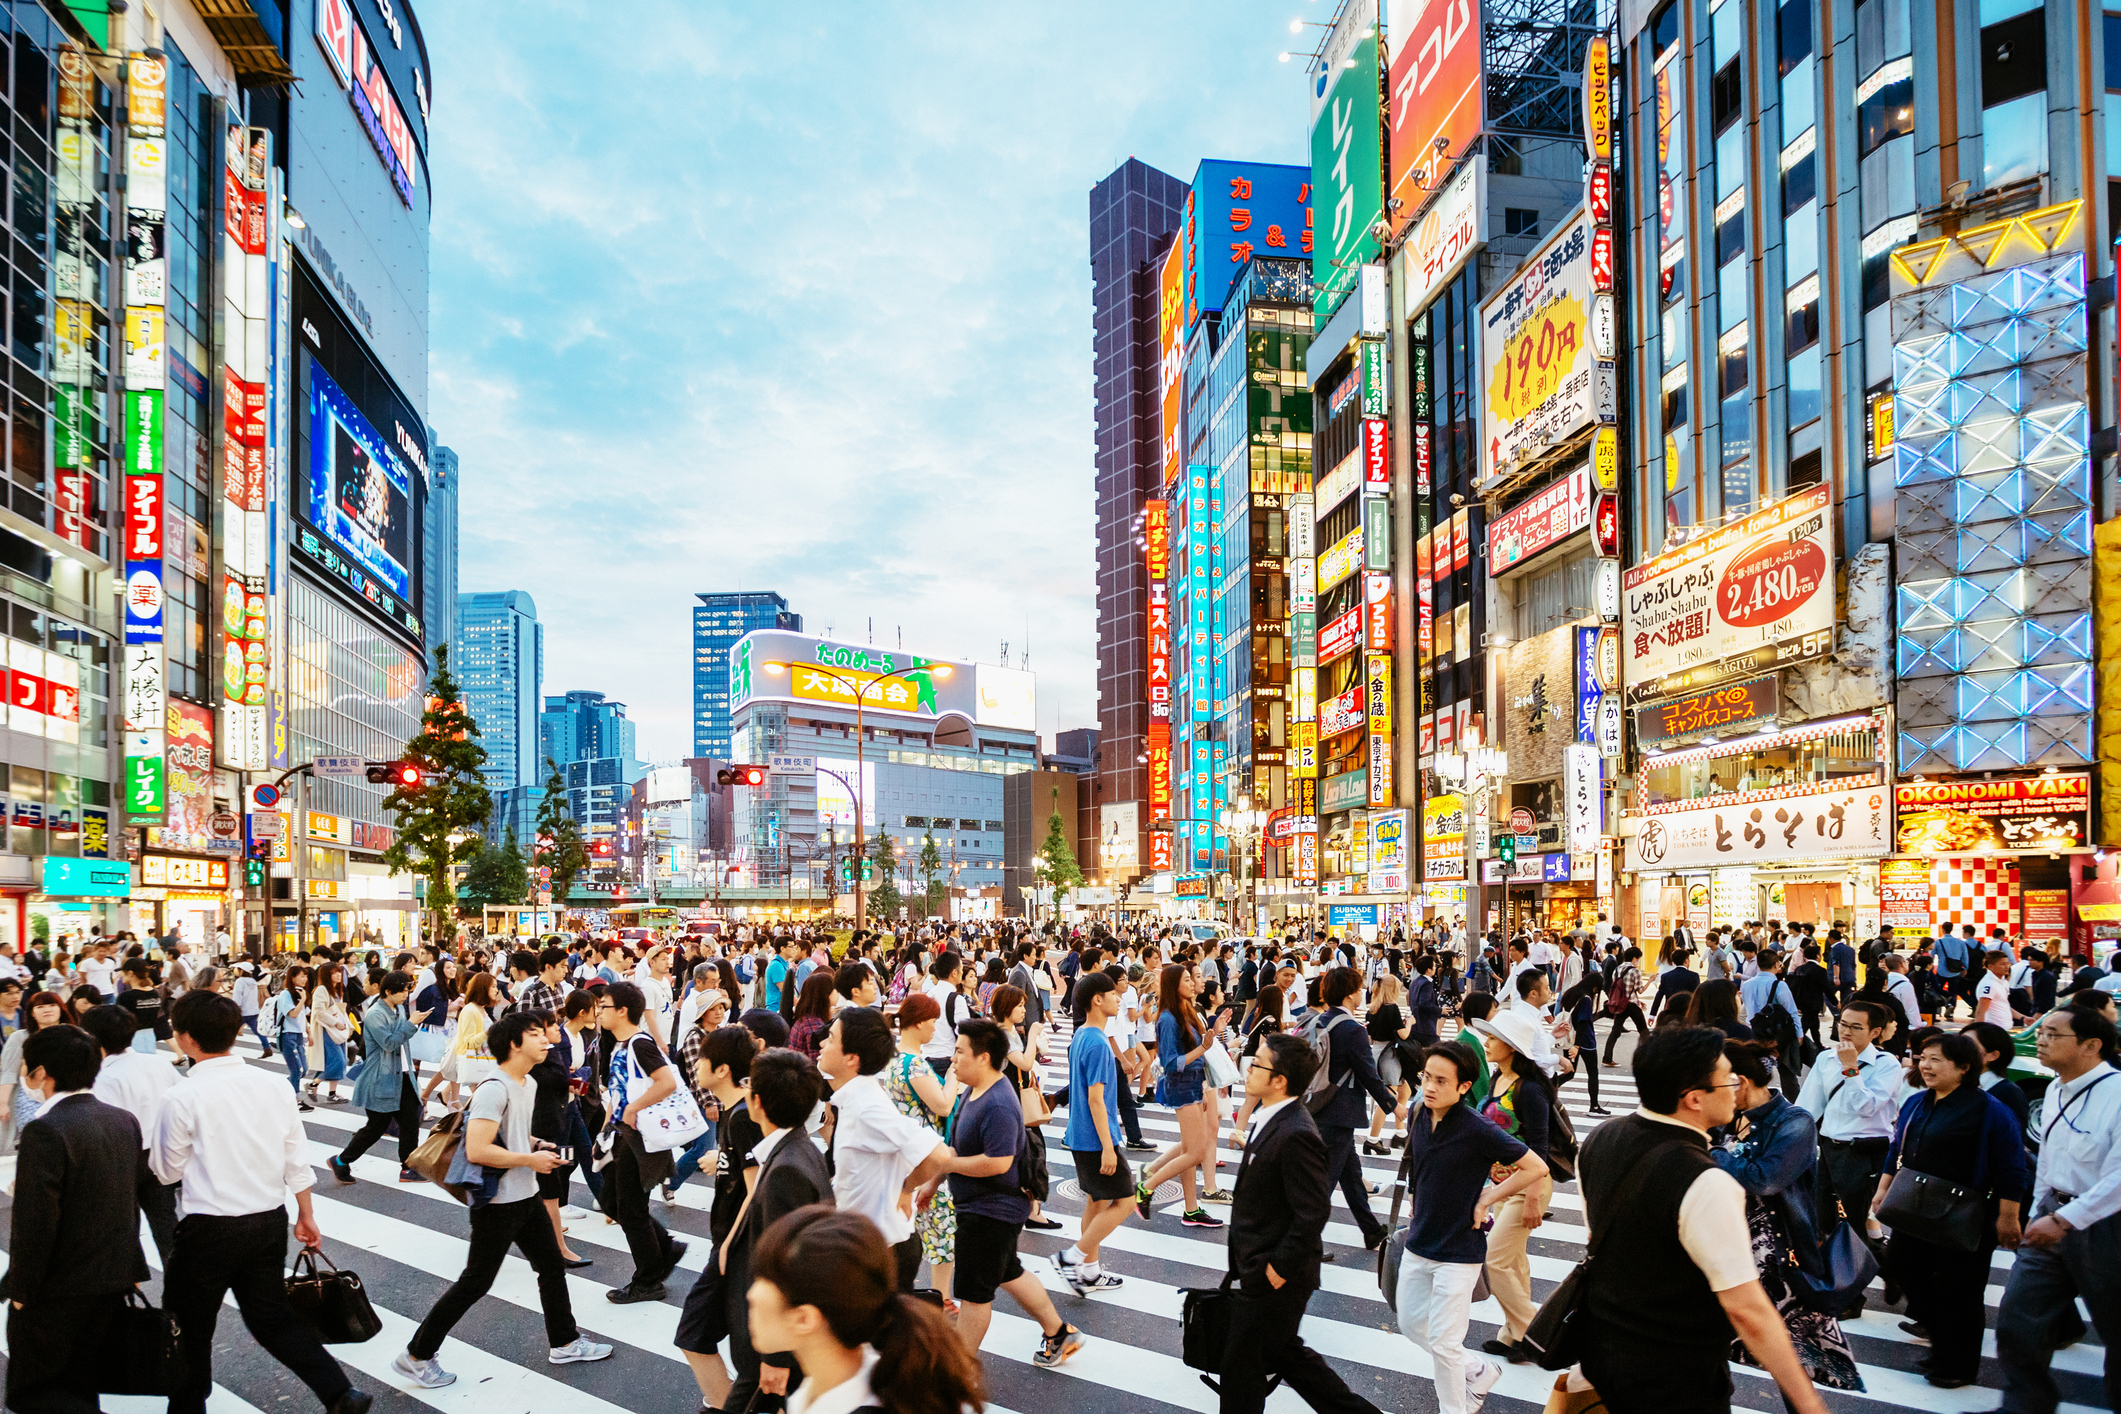 Crowded city street in downtown Tokyo, with people walking in all directions. Bright neon signs and tall buildings fill the background. No celebrities are present